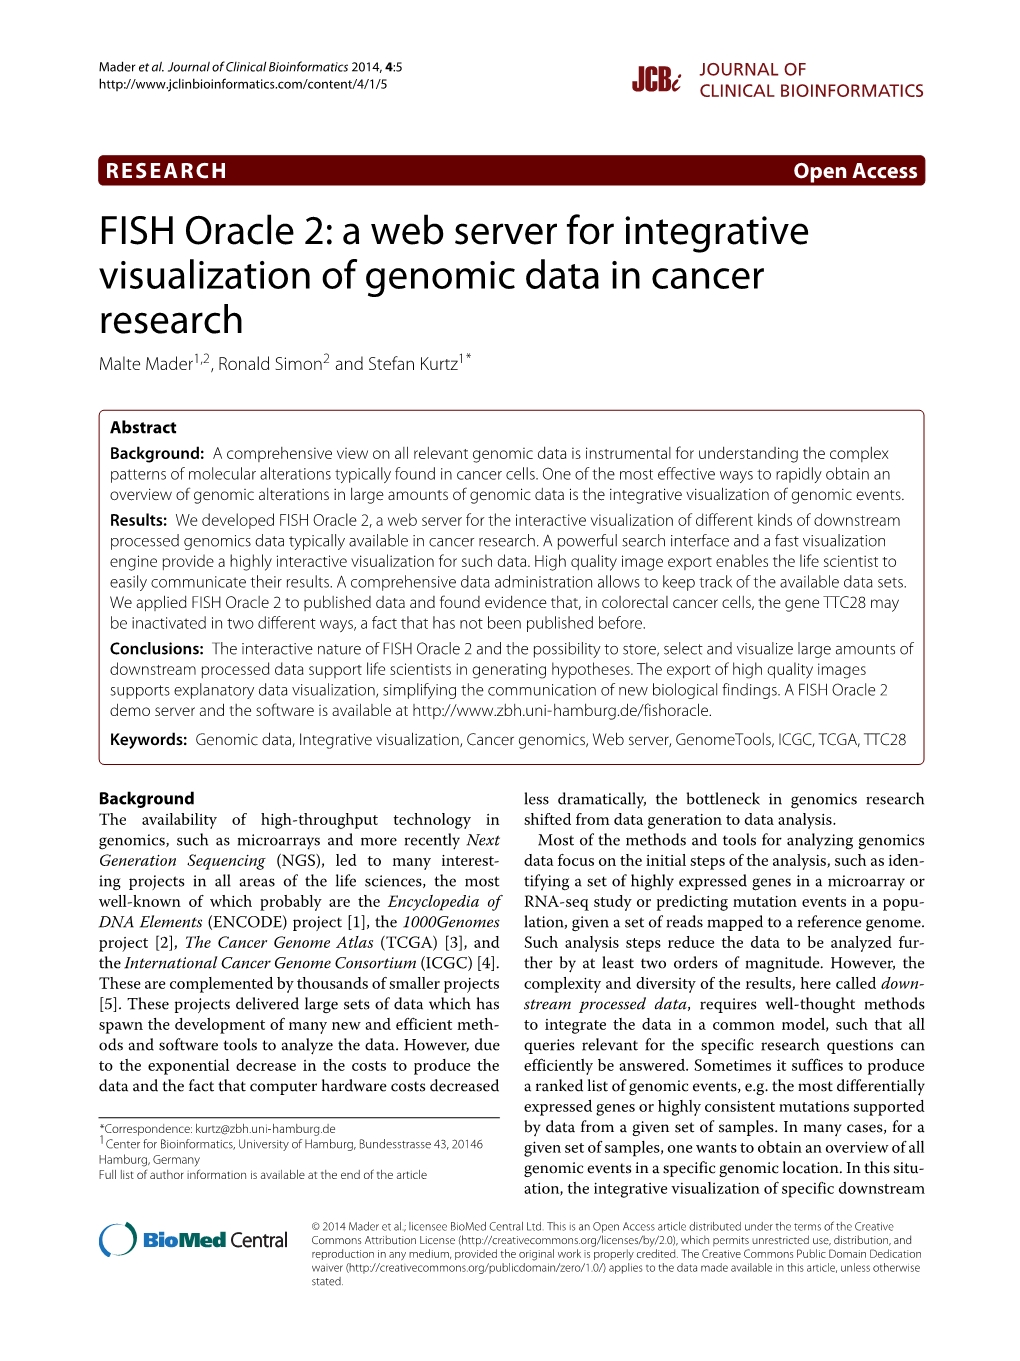 FISH Oracle 2: a Web Server for Integrative Visualization of Genomic Data in Cancer Research Malte Mader1,2, Ronald Simon2 and Stefan Kurtz1*